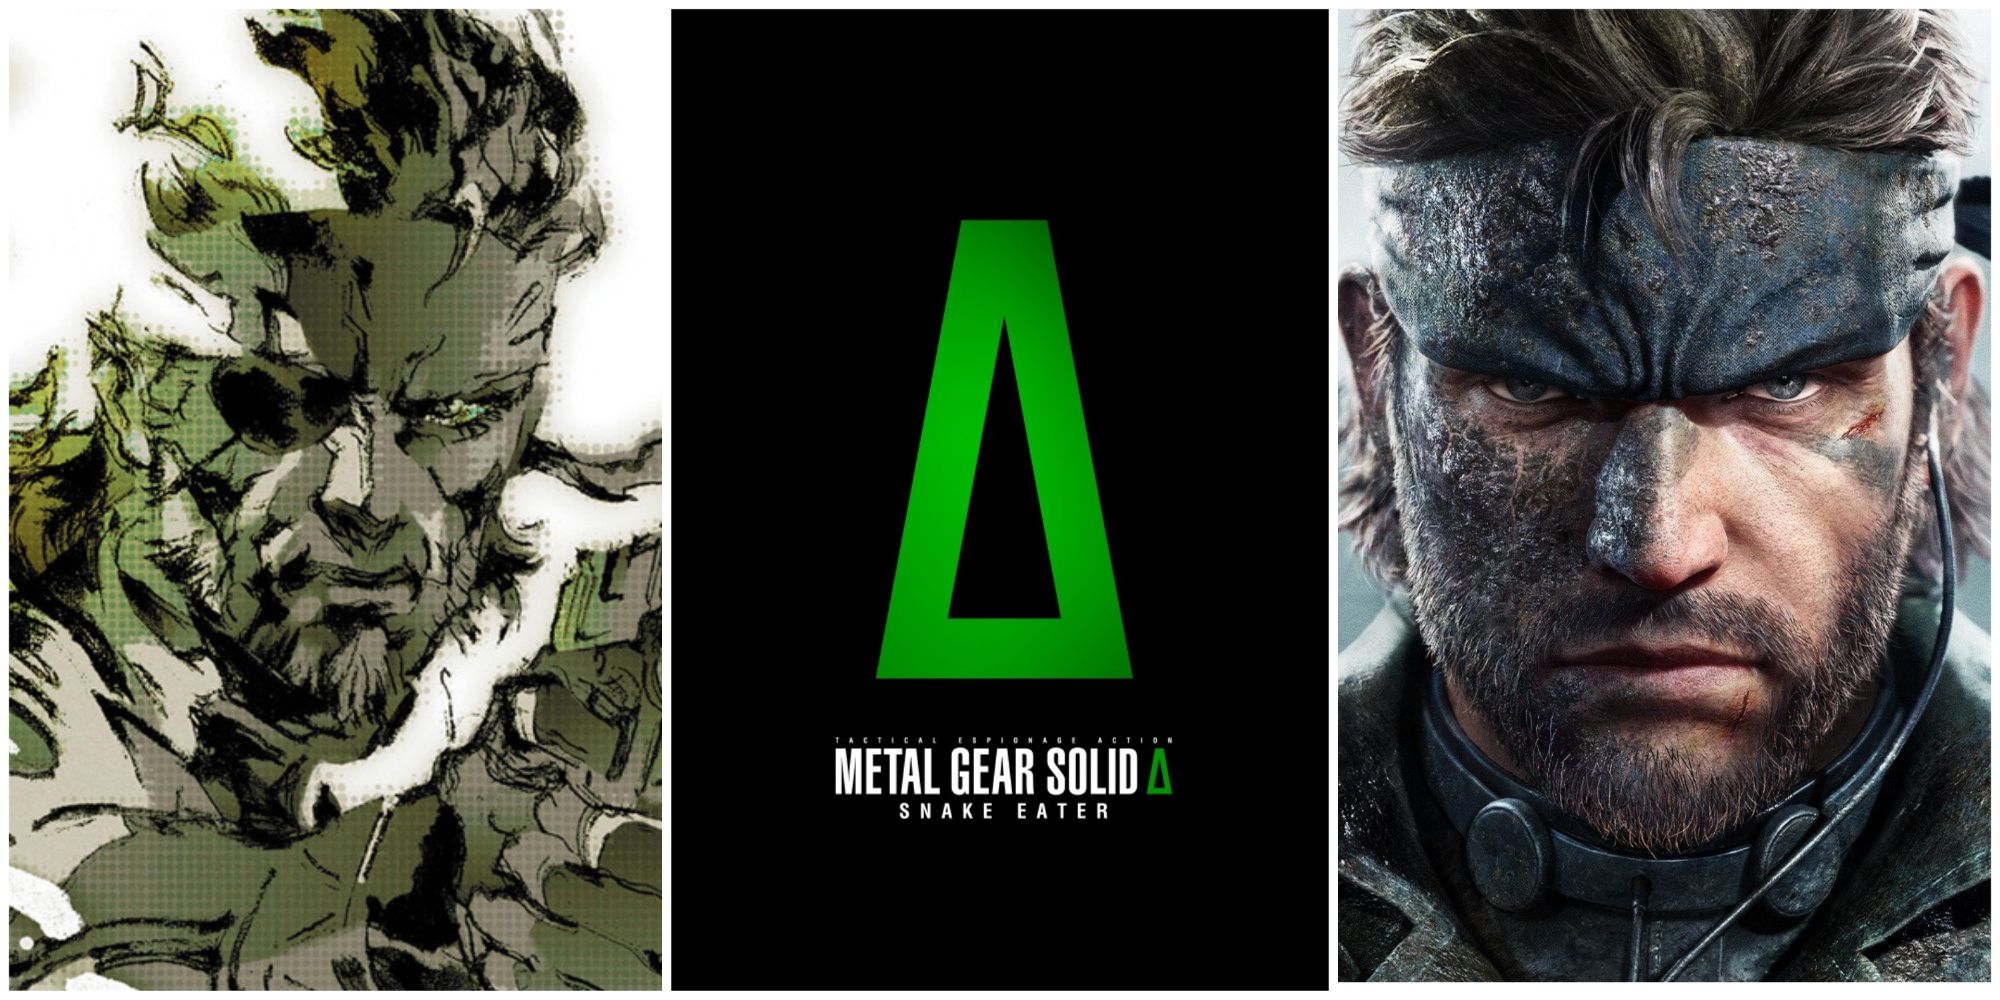 Metal Gear Solid Delta: Snake Eater Gets First In-Engine Look